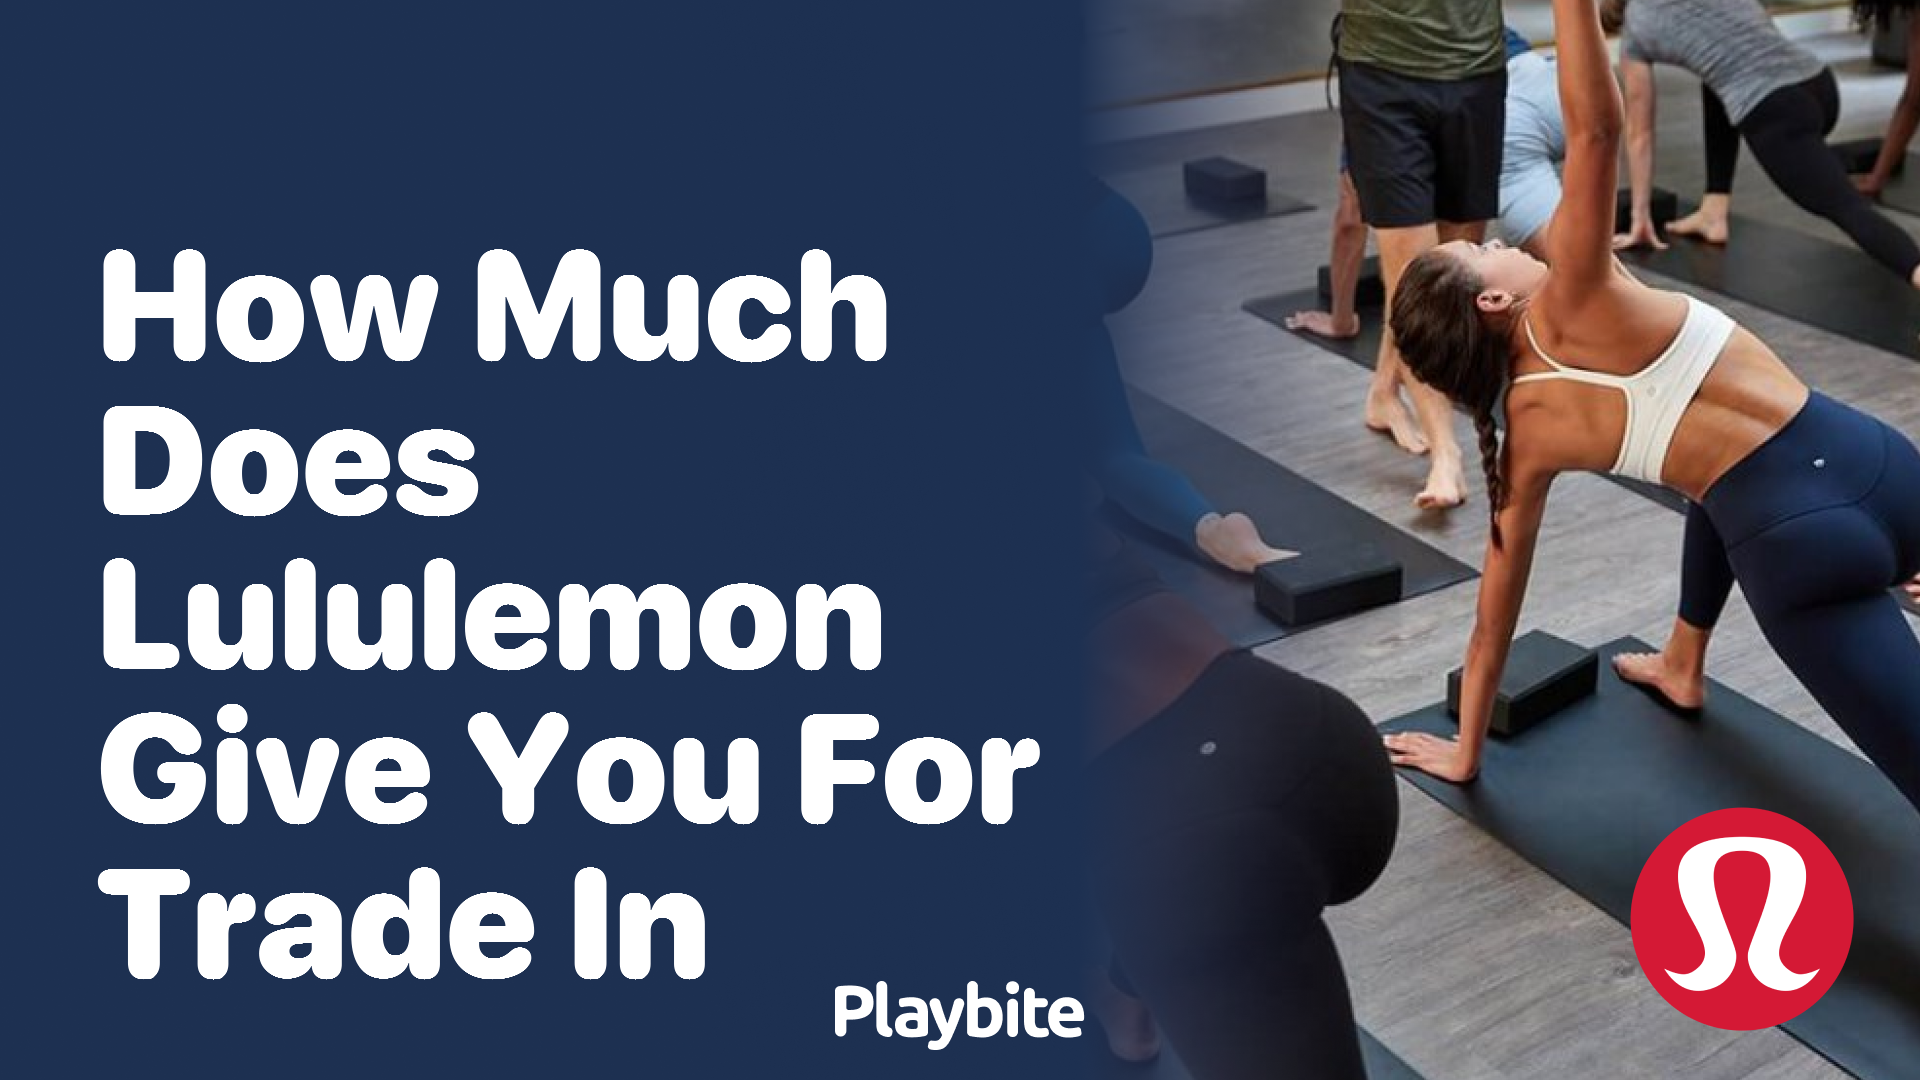 How Much Does Lululemon Pay for Used Clothes? - Playbite